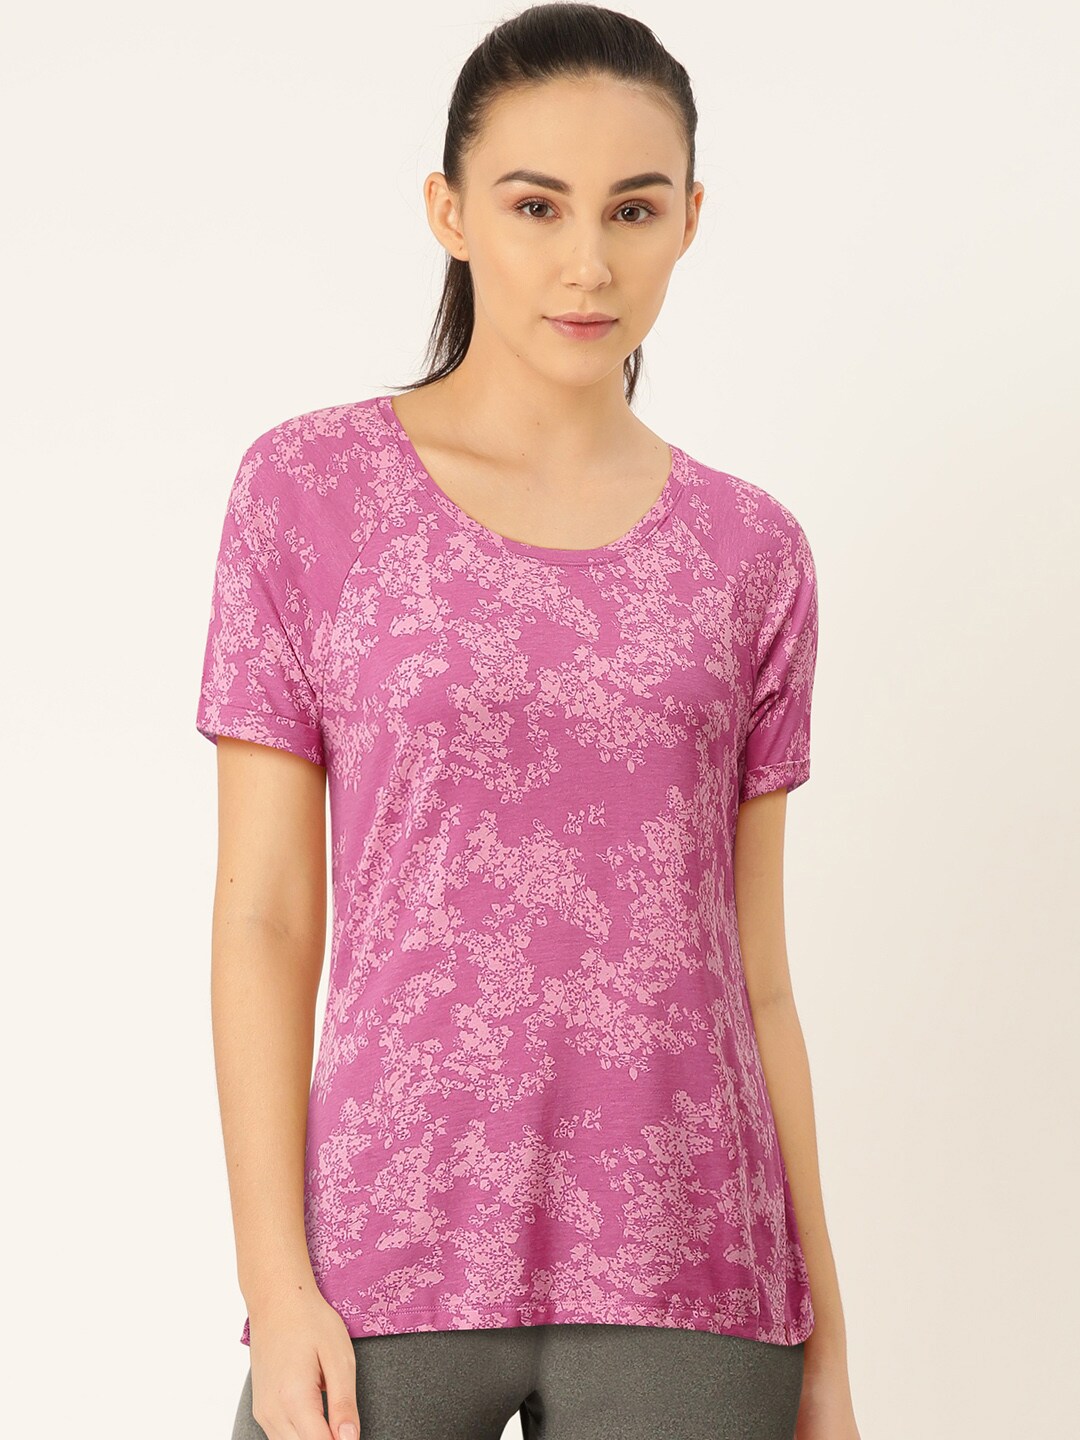 Jockey Women Pink & Lavender Floral Print Round Neck Sports T-shirt Price in India